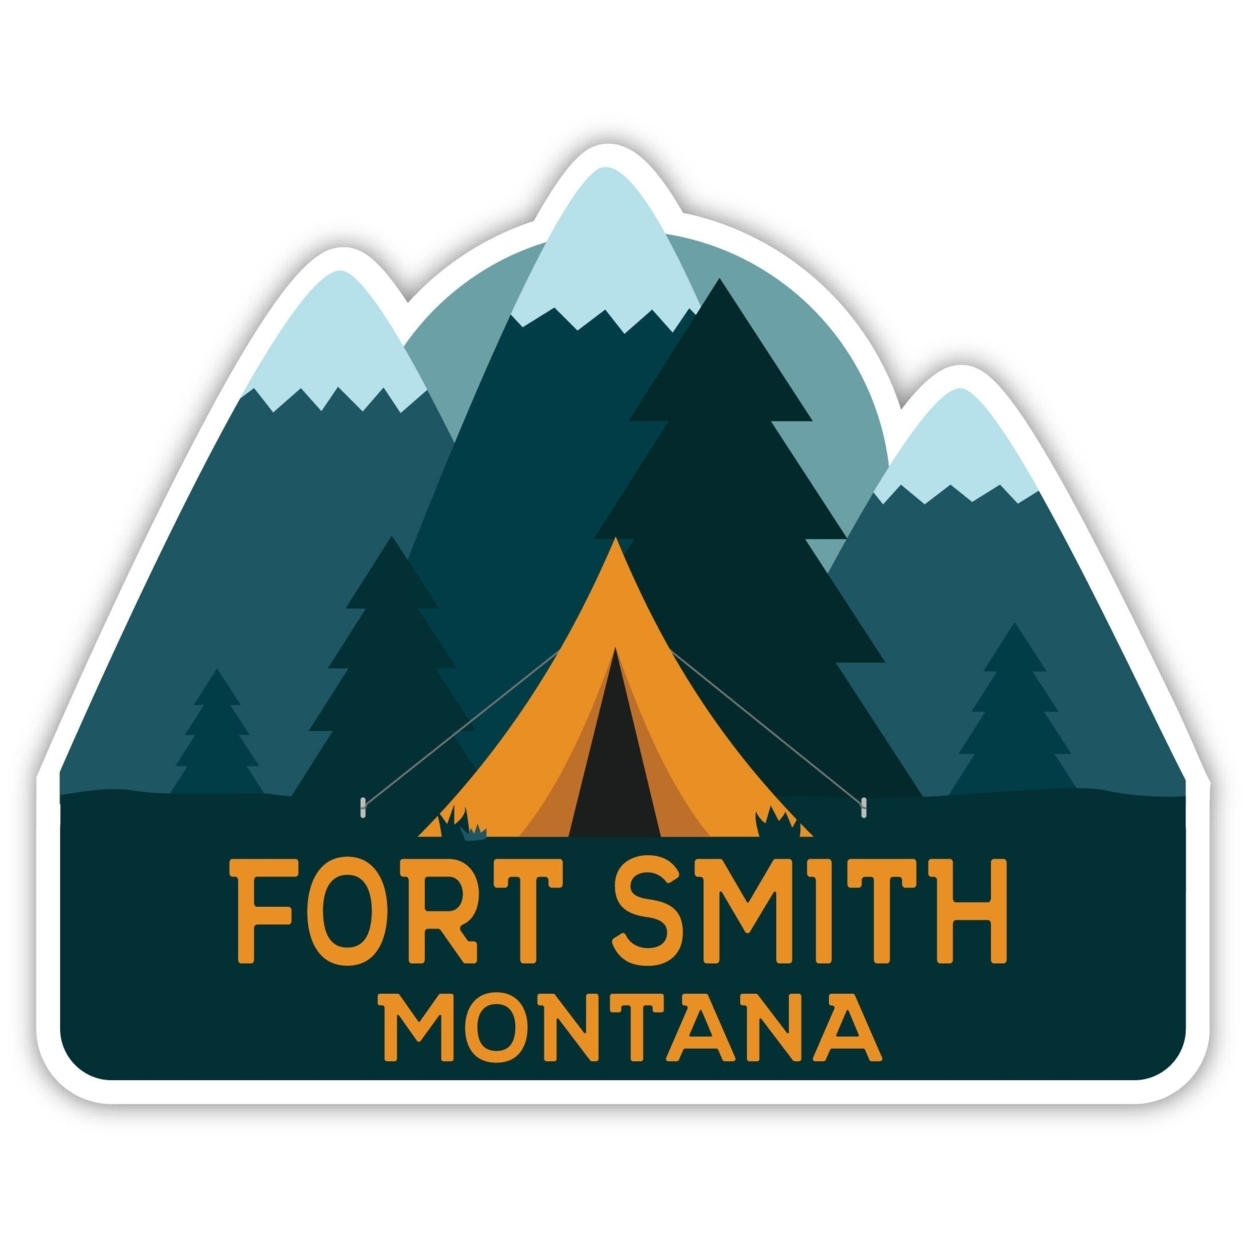 Fort Smith Montana Souvenir Decorative Stickers (Choose Theme And Size) - 4-Pack, 10-Inch, Bear